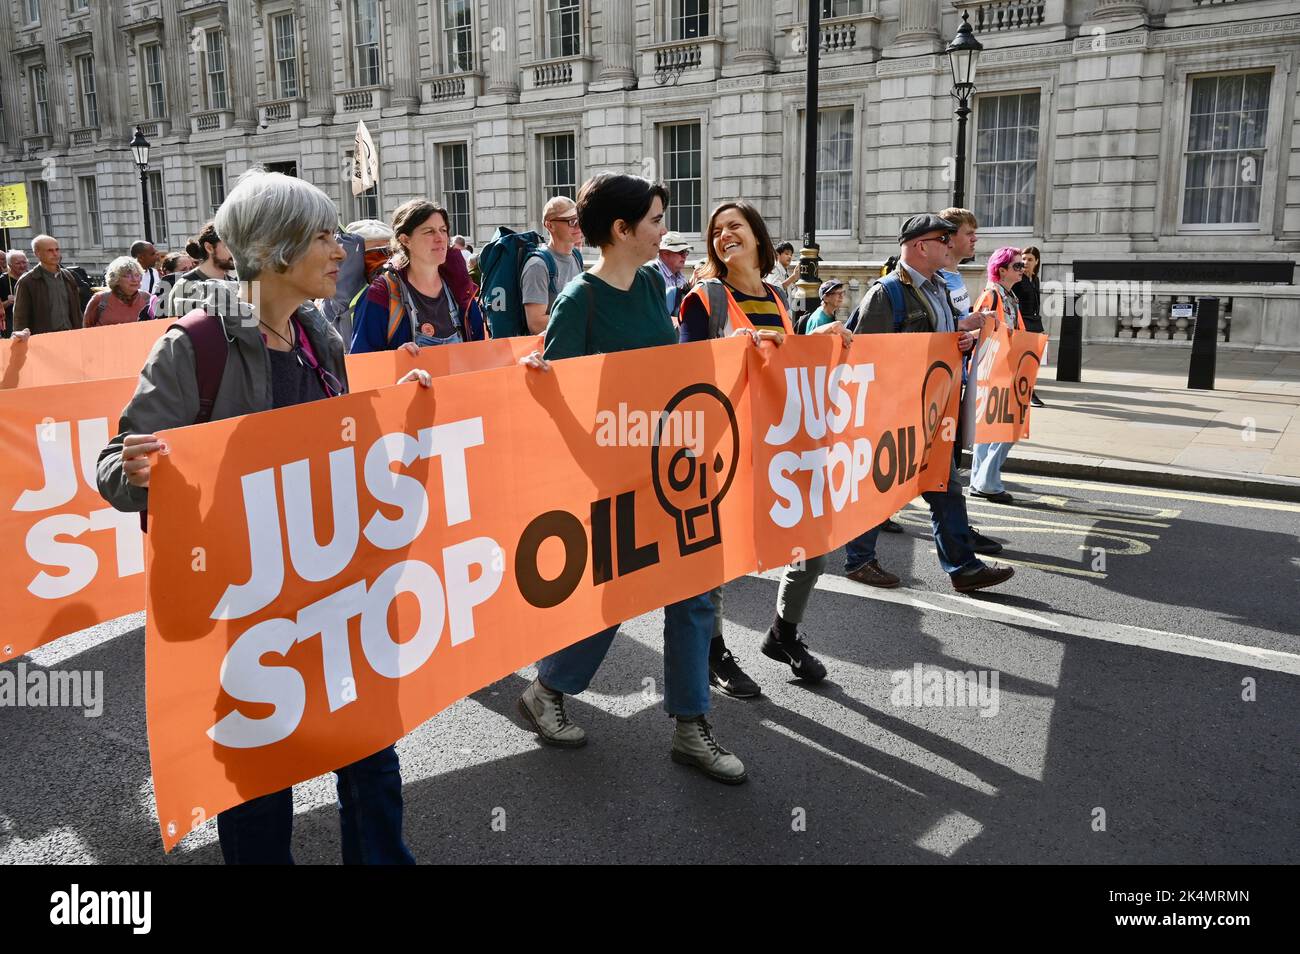 London, UK. Just Stop Oil Protest in Whitehall, Westminster. A group of activists staged a sit in outside No 10 Downing Street and Trafalgar Square. They have pledged to return every day until the government meets their demands. Stock Photo